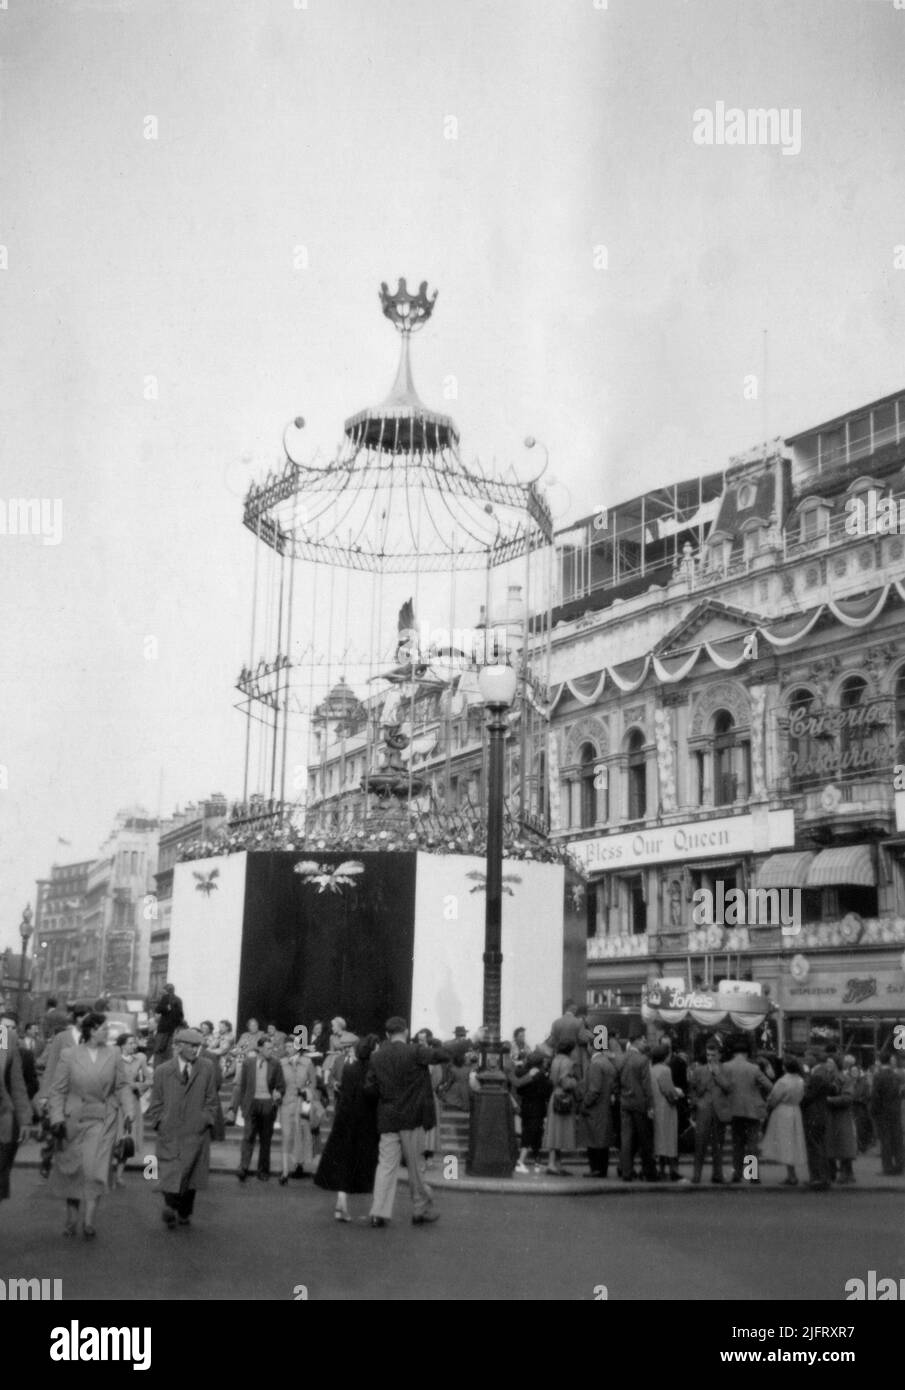 Decorative ornamental bird cage erected around the statue of Eros, Piccadilly Circus, London during the celebrations for the coronation of Queen Elizabeth II. 1953. Designed by Sir Hugh Maxwell Casson. Stock Photo